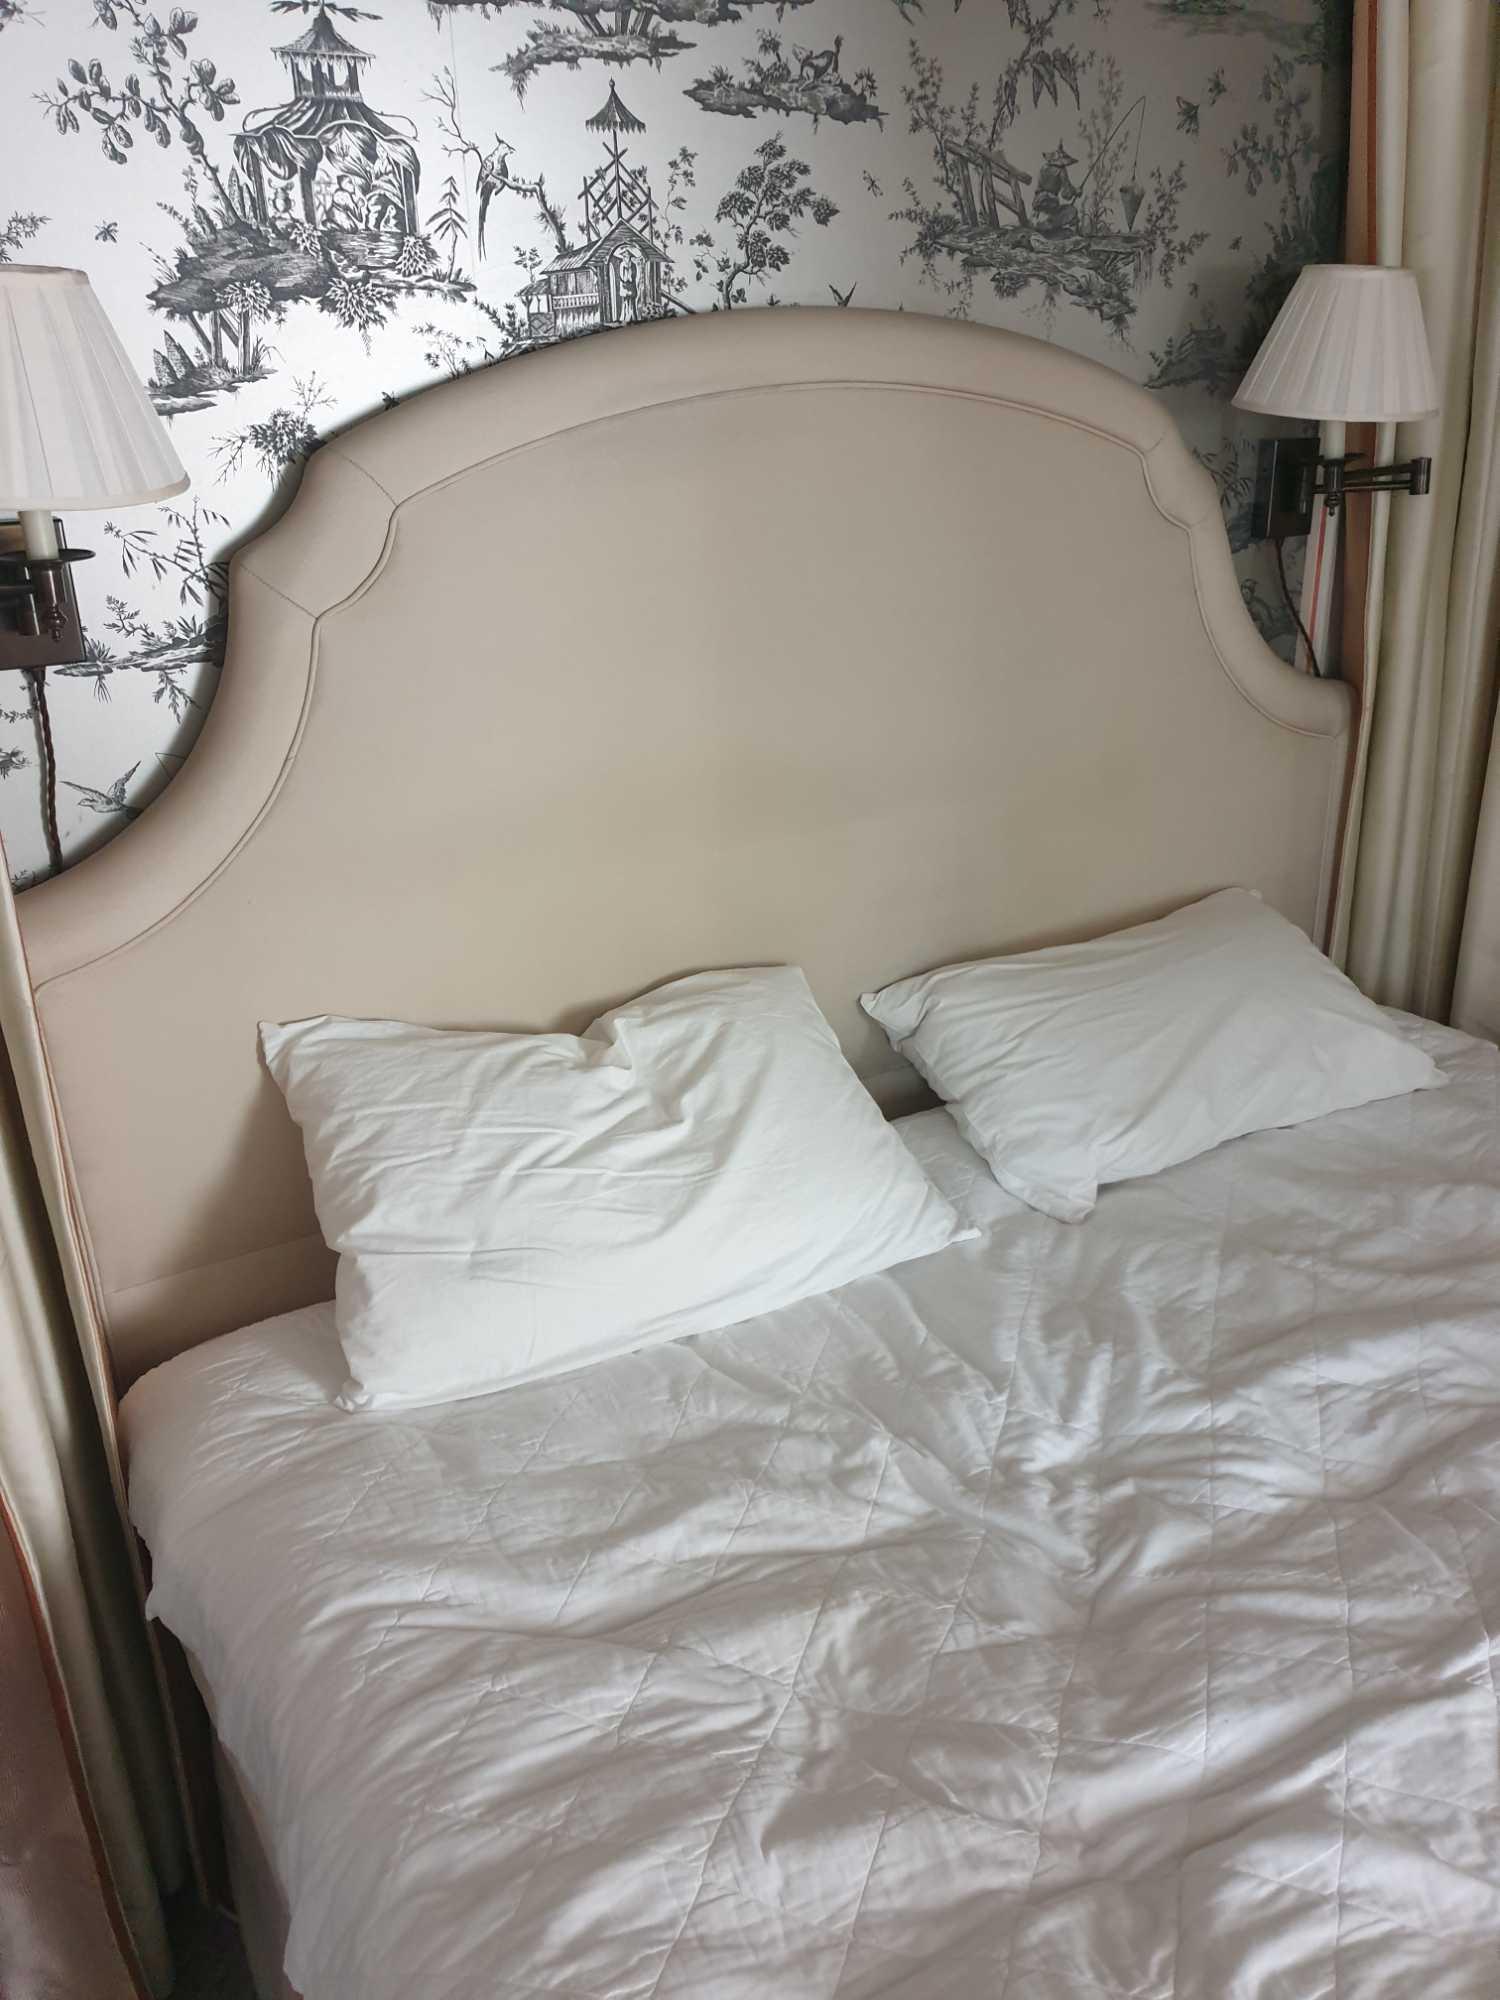 Bed Canopy And Headboard With Floating Pelmet And Curtains Striped Cream And Gold Pelmet And - Image 4 of 5